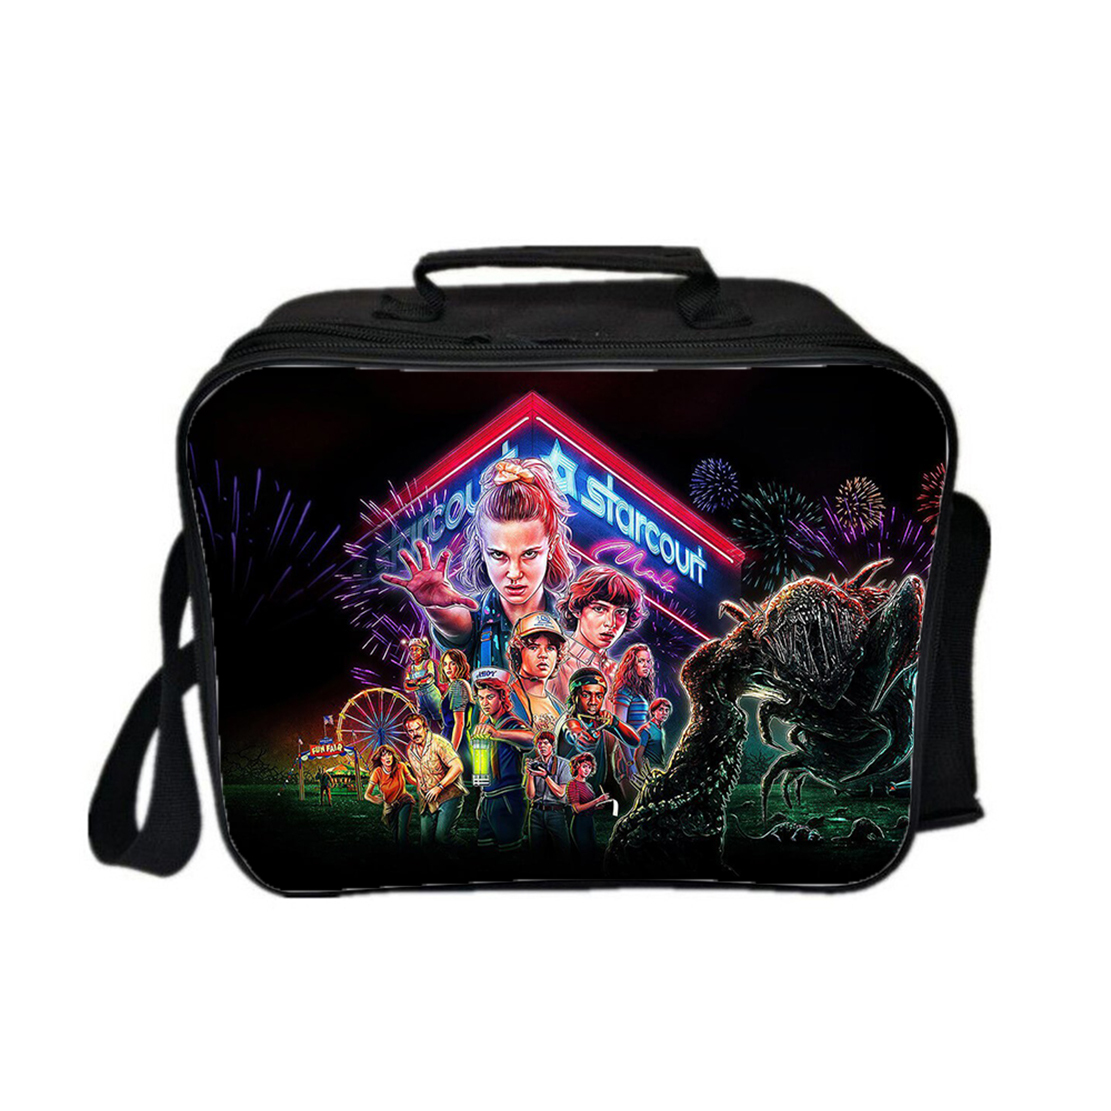 Primary image for Stranger Things Season 3 Kid Adult Lunch Box Lunch Bag Picnic Bag C